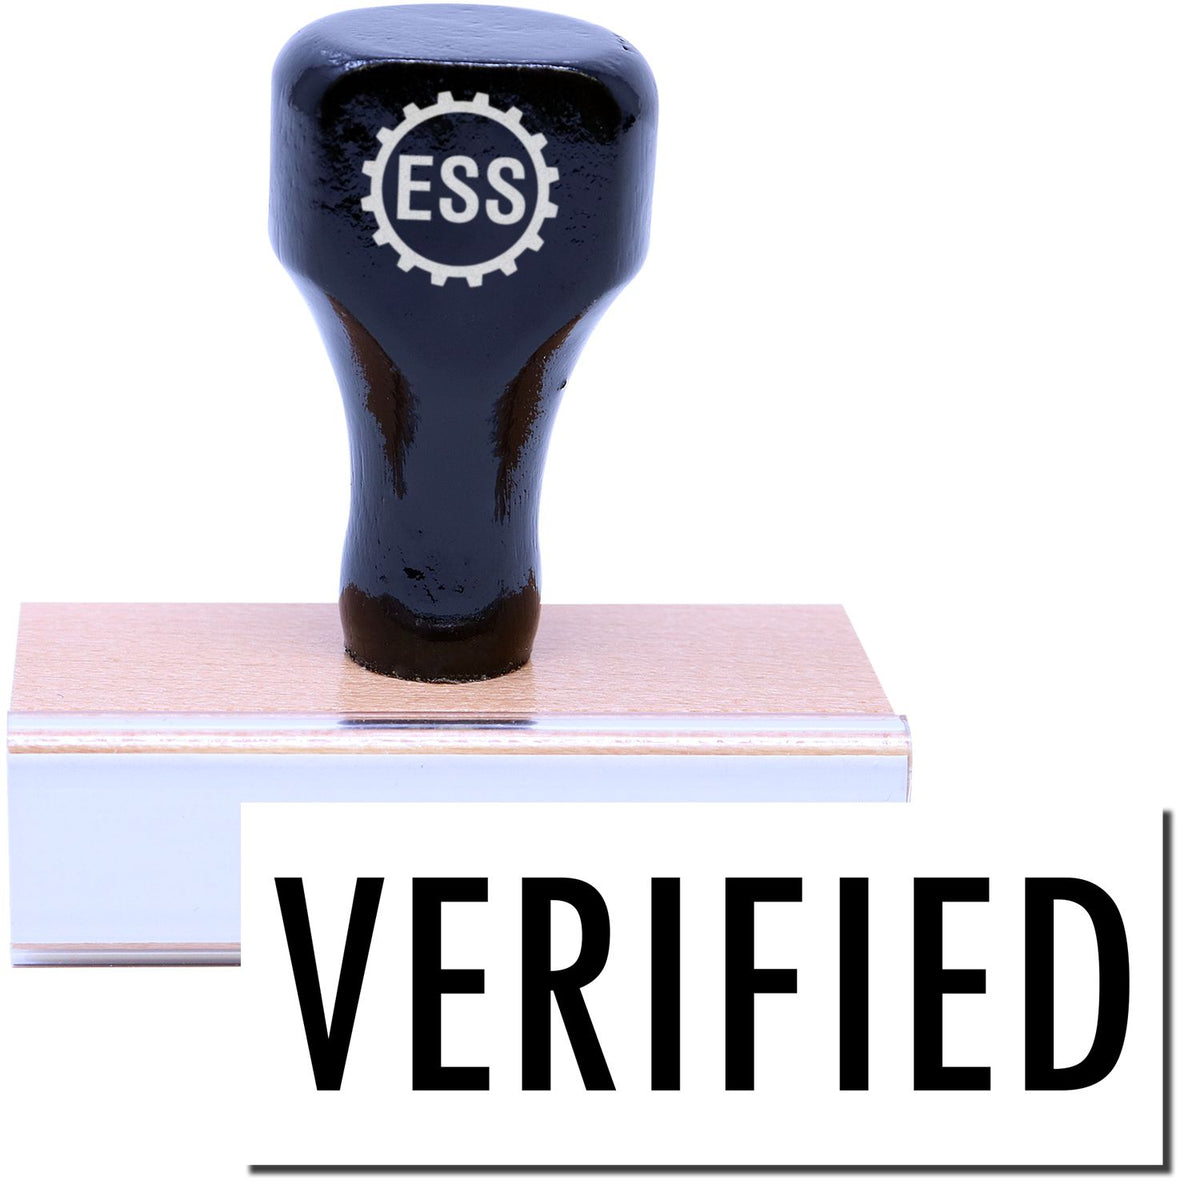 A stock office rubber stamp with a stamped image showing how the text &quot;VERIFIED&quot; in a large font is displayed after stamping.